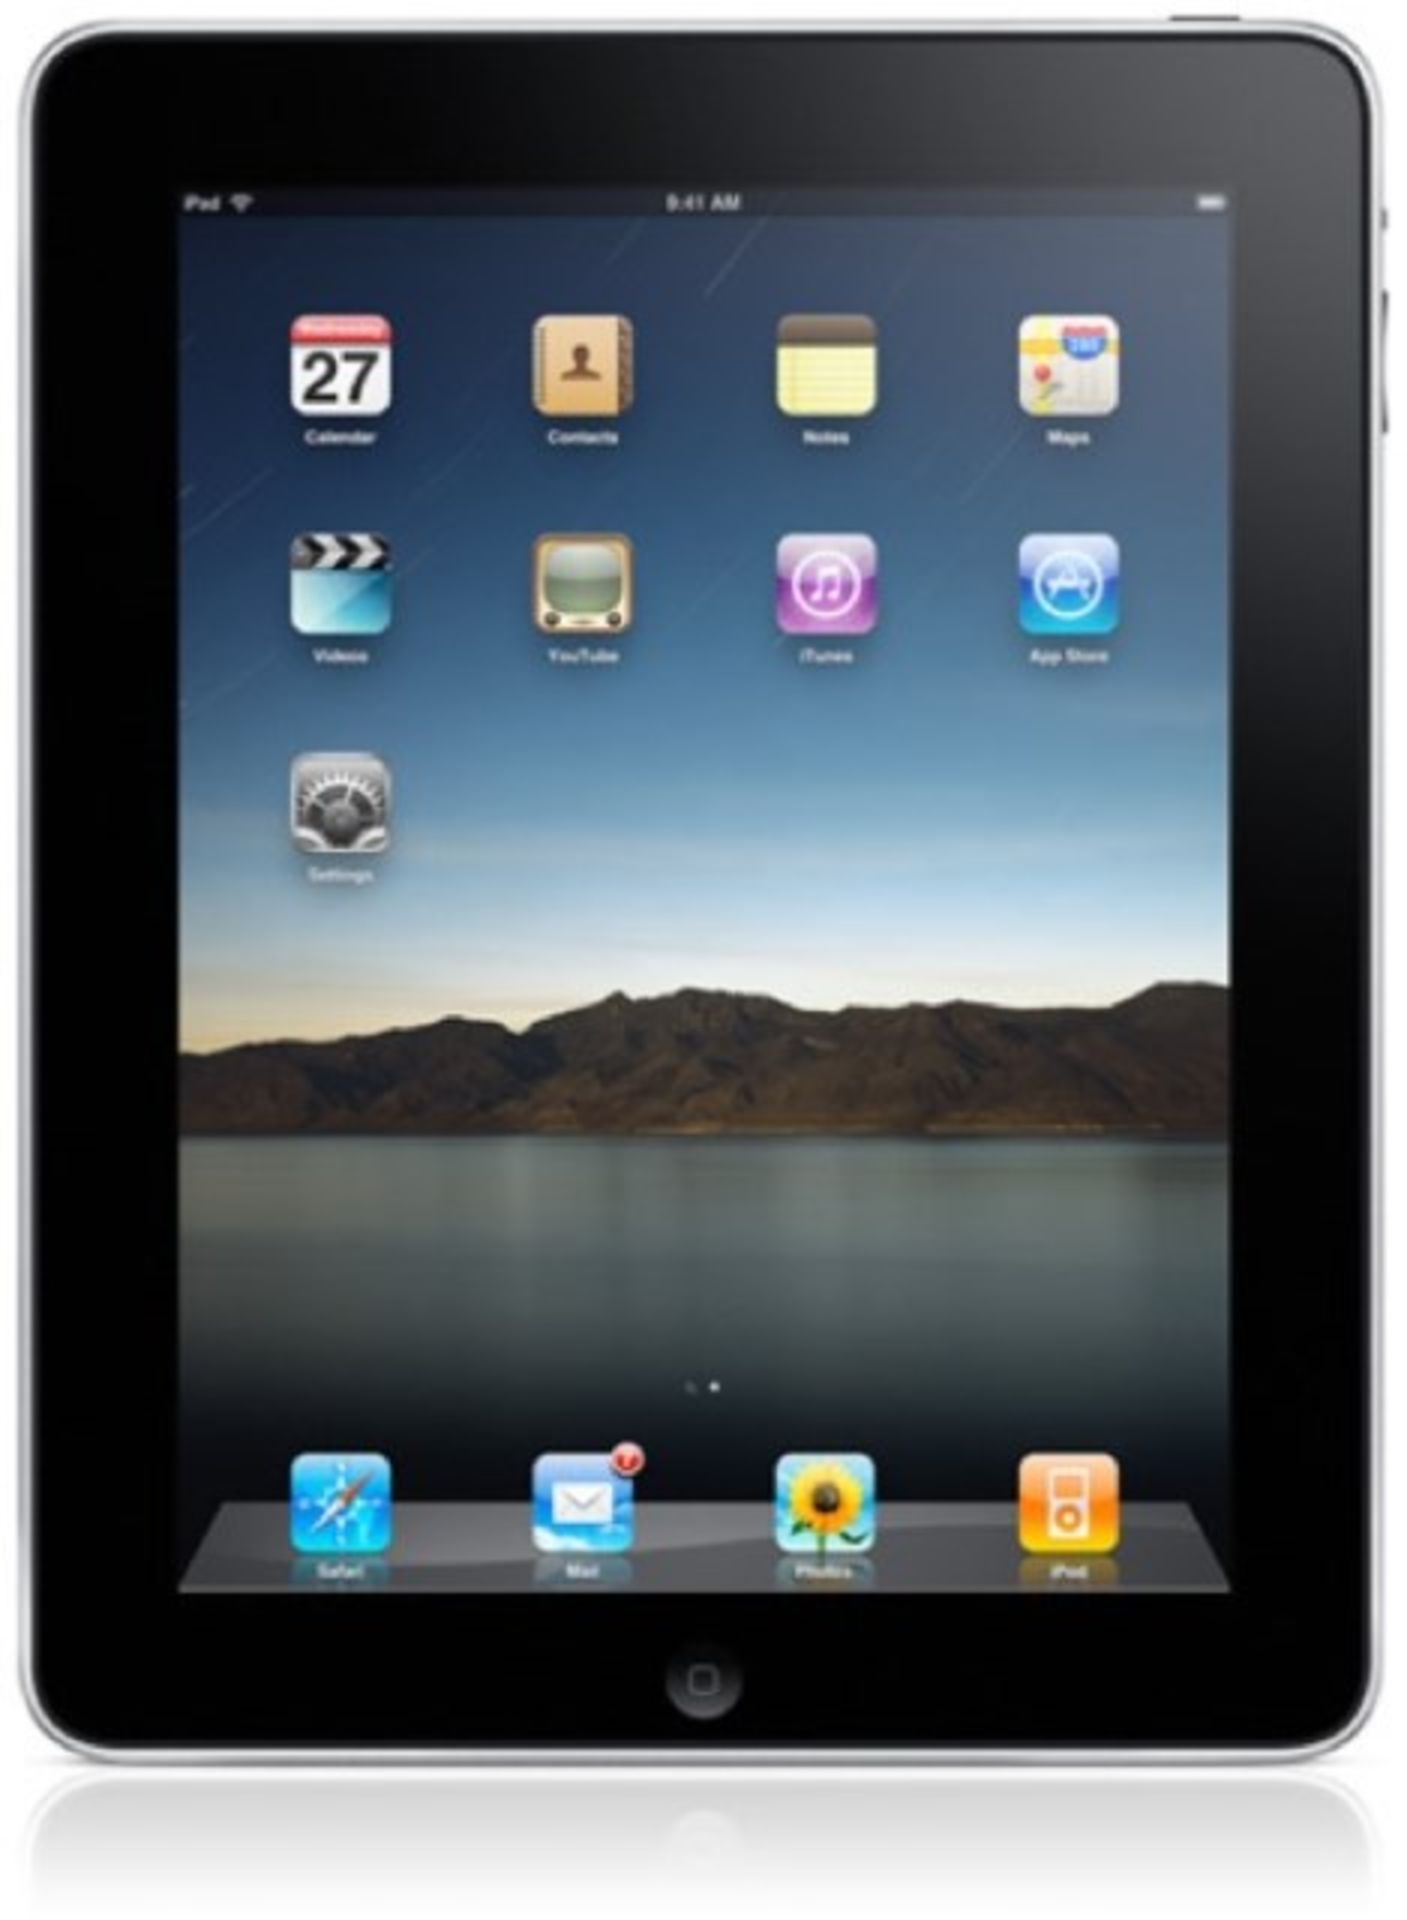 V Apple iPad 64Gb 3G & Wi-Fi With Box (Generic) and Warranty (Some units may have blemishes to